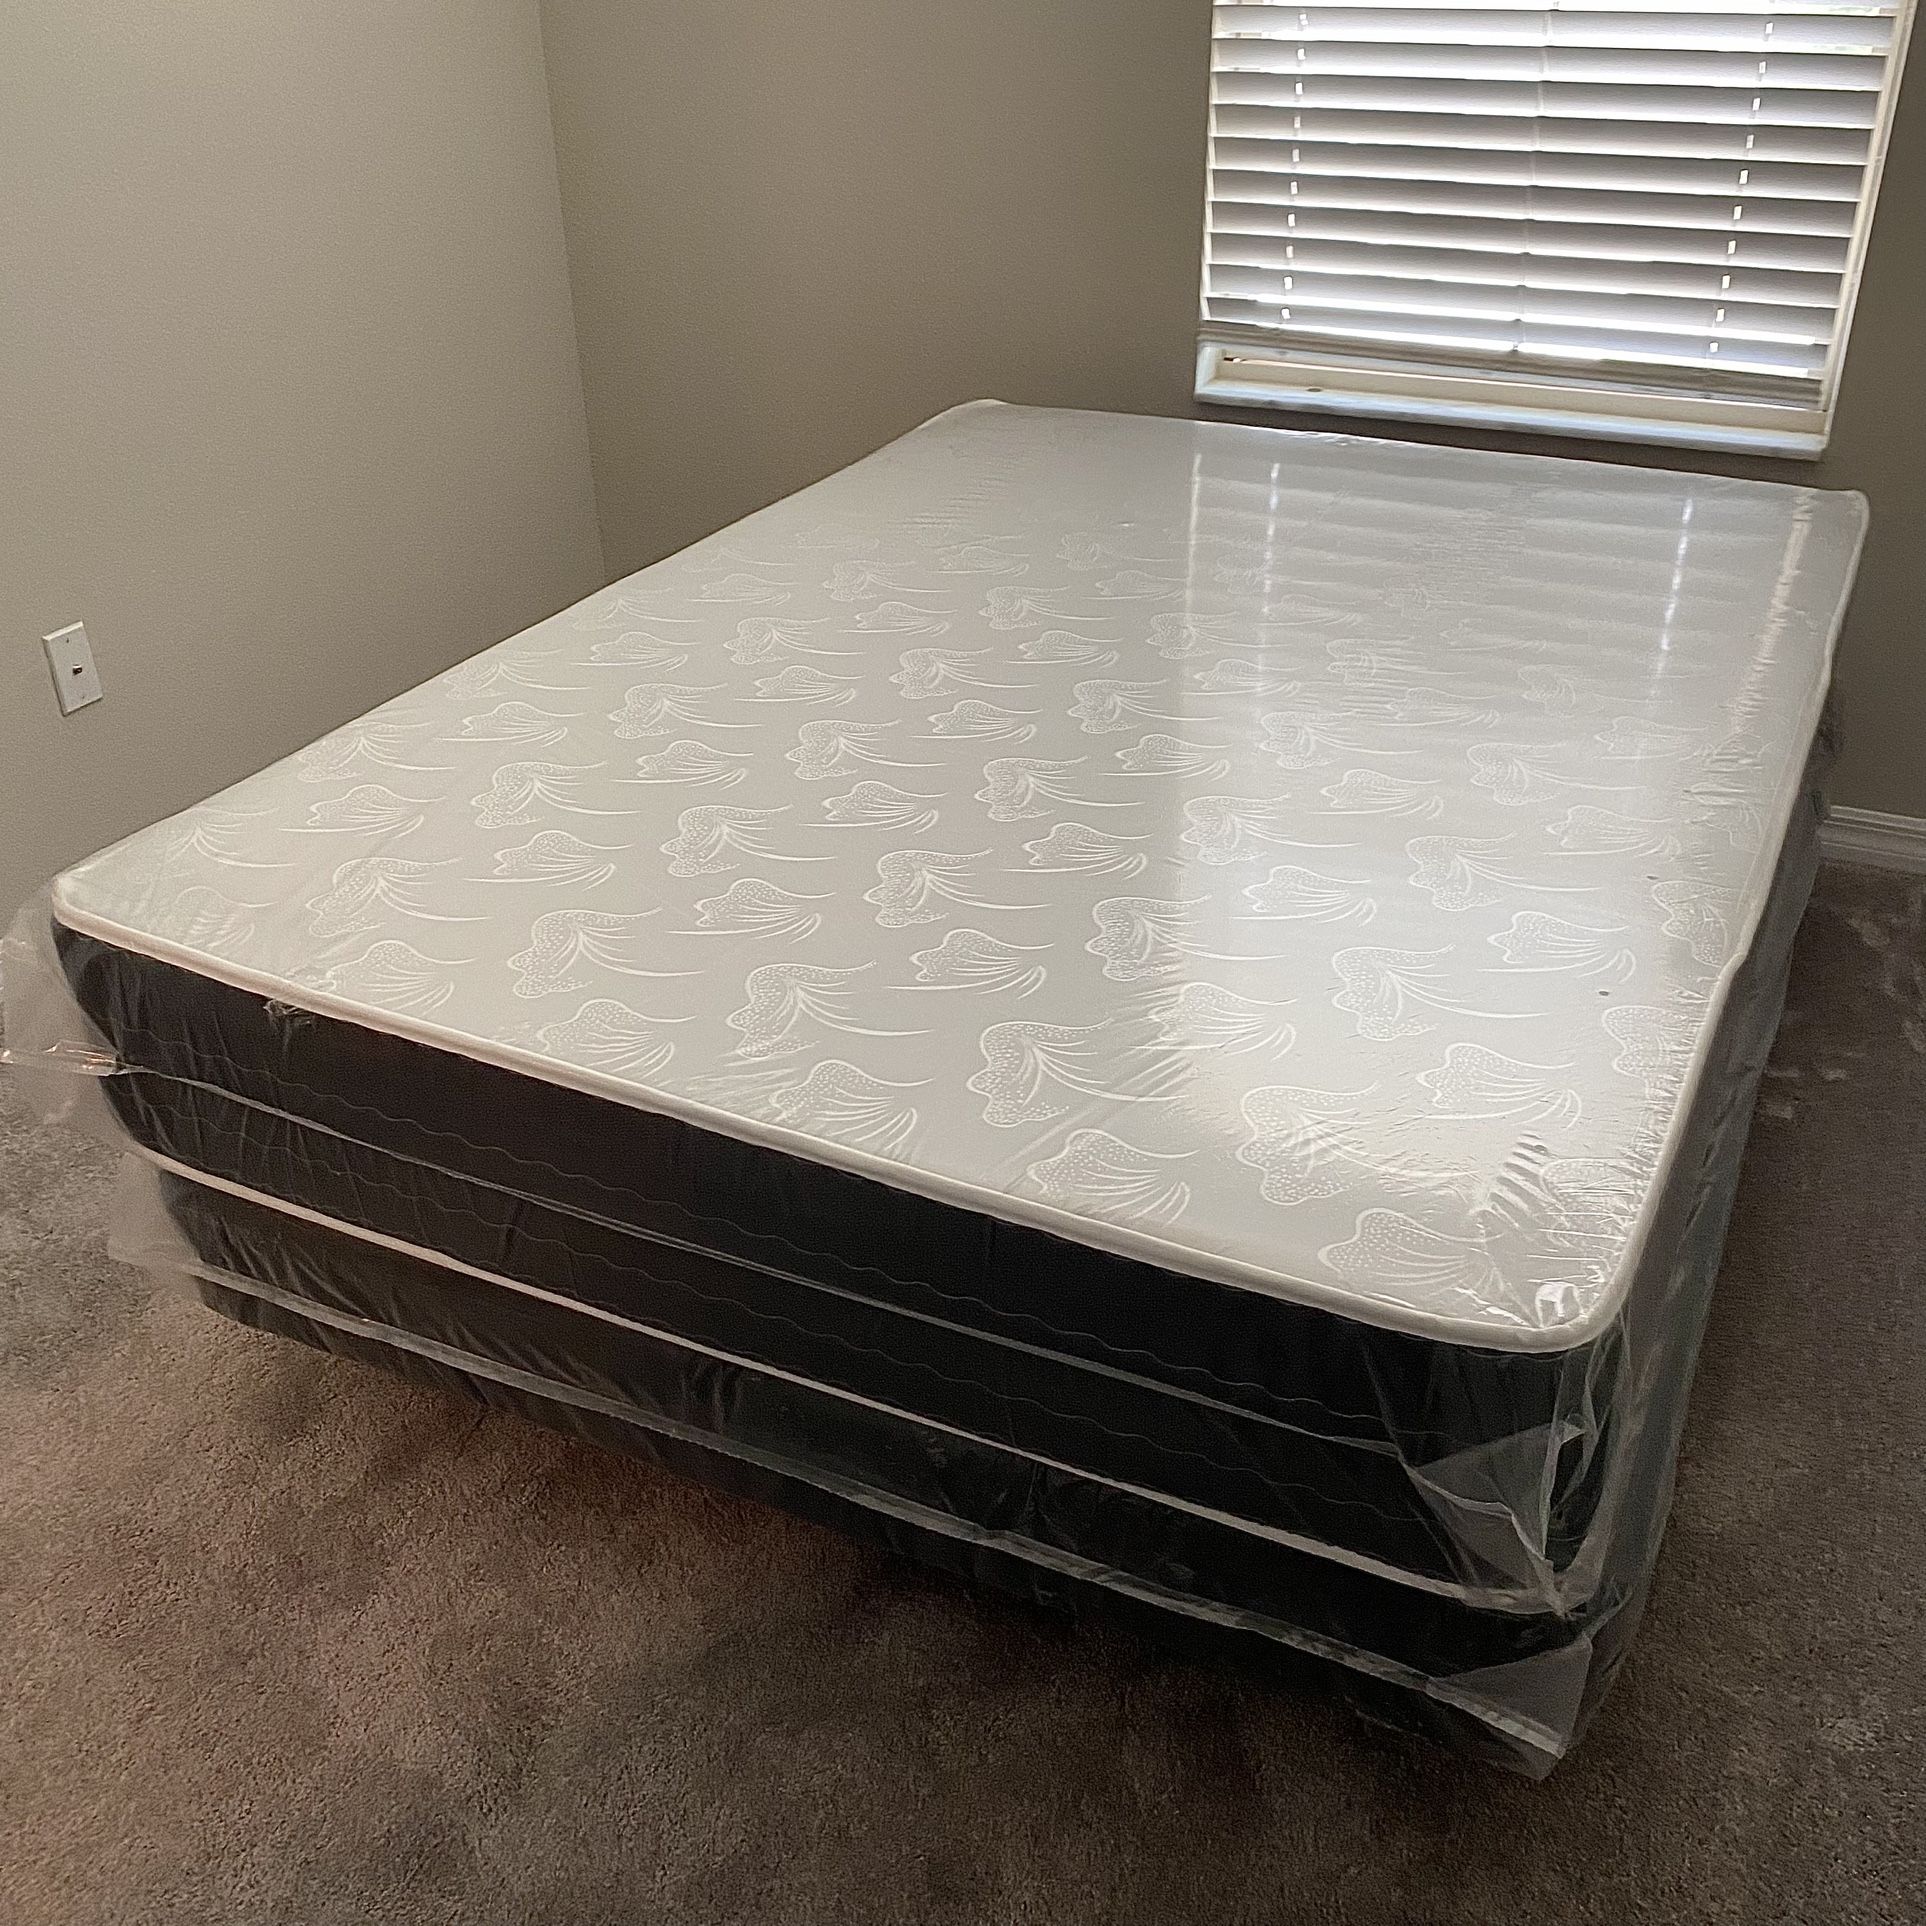 Full Size Mattress 10 Inches Thick Also Available in Twin-Queen-King New From Factory Same Day Delivery